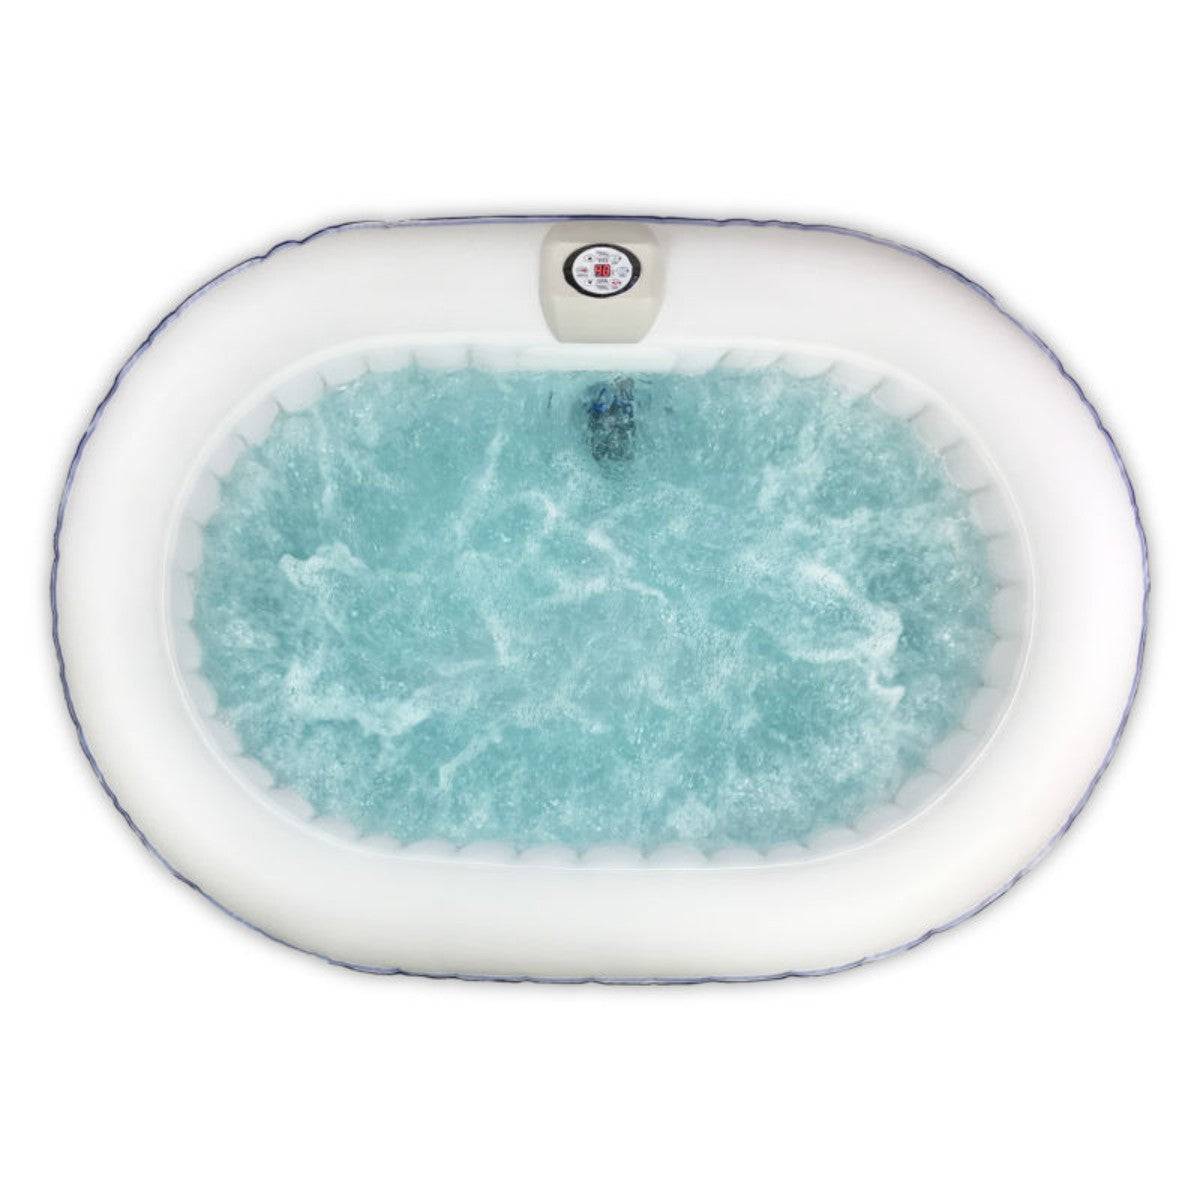 Jacuzzi | Hot Tub | SPA Inflable Elqui / 2 personas